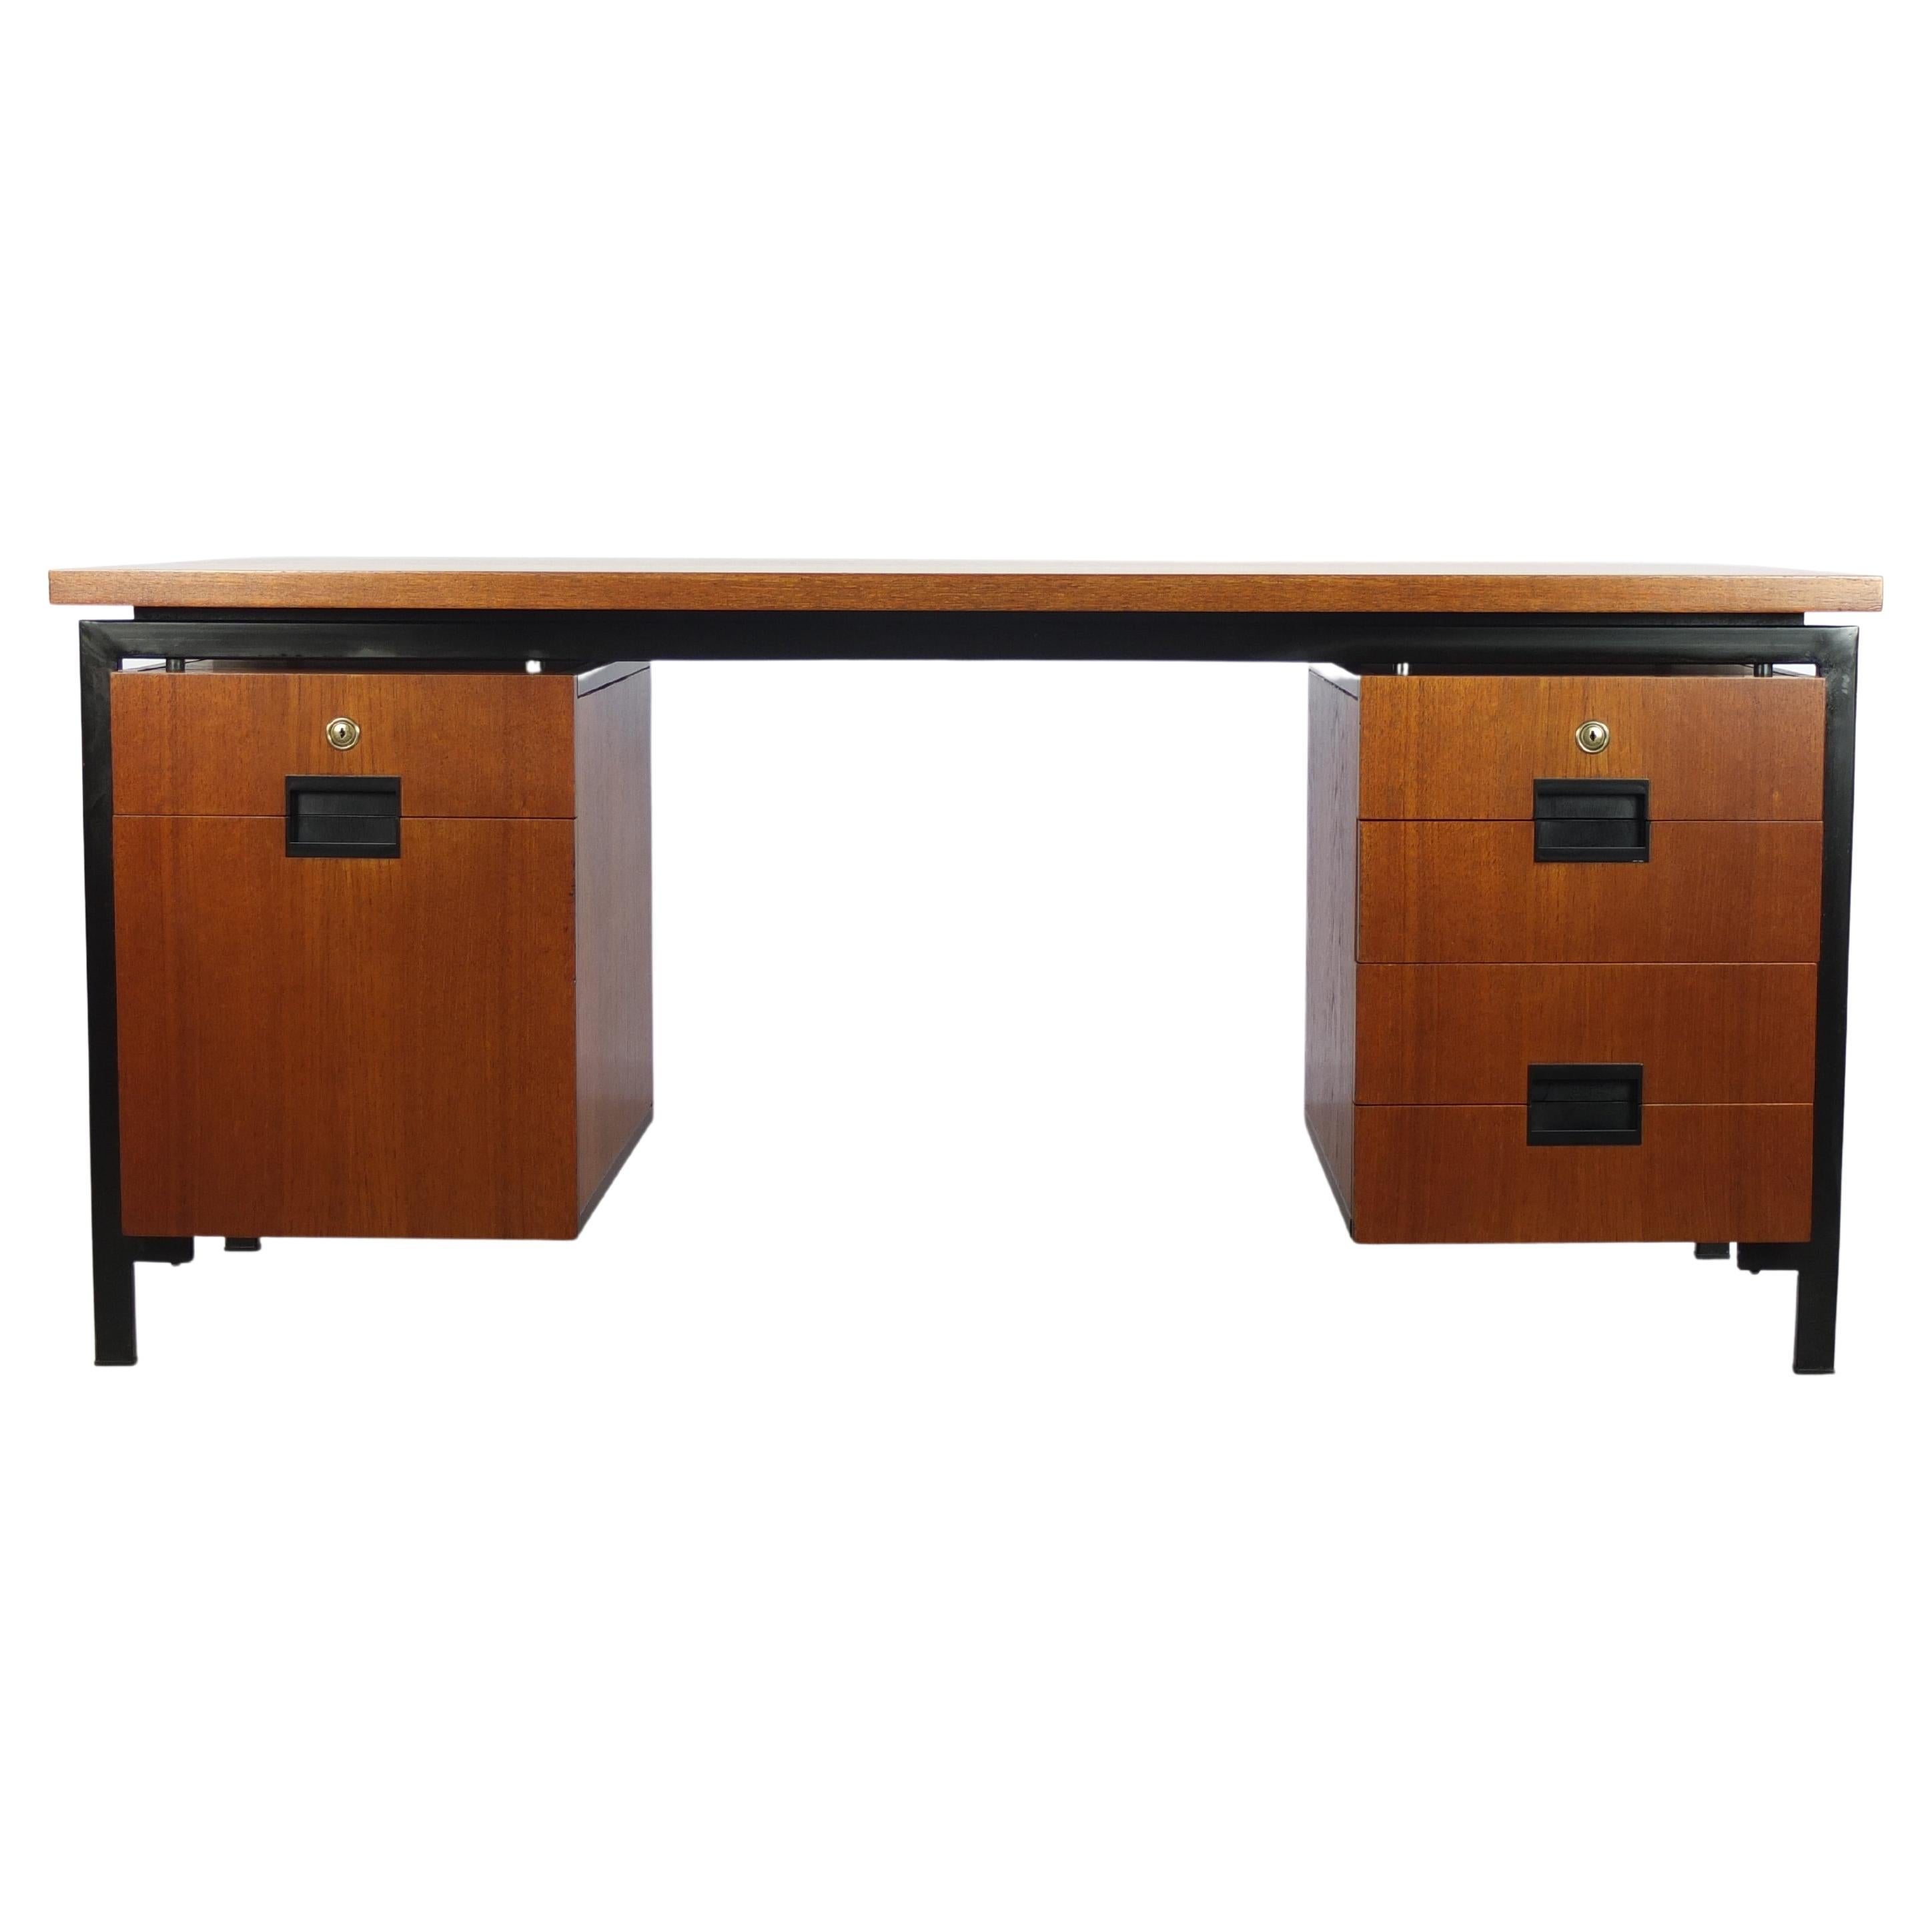 Great desk designed by Cees Braakman for Pastoe during the 1960s. This is the larger model ‘EU02’ which is part of the famous Japanese series recognized by the use of teak wood with a black metal frame and the signature drawer pulls. In mint